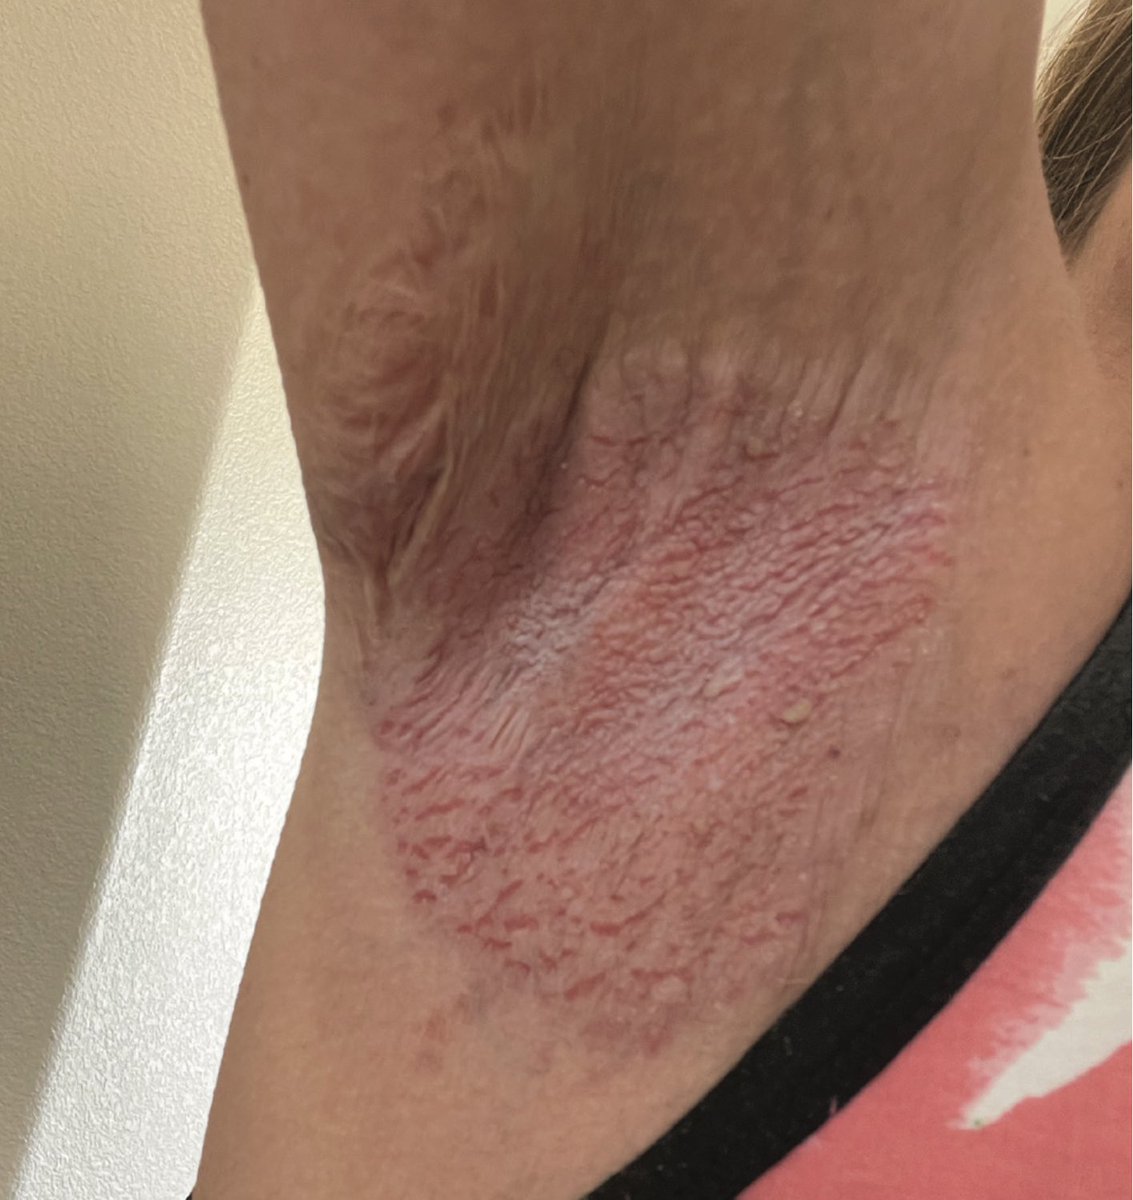 In this article, we present a patient with a history of recalcitrant HHD who had clearance of her current disease flare with the topical JAK inhibitor #ruxolitinib.

Read The Case Report: okt.to/BCY6E3

#HaileyHailey #Derm #Dermatology #Dermatologist #DermInsights